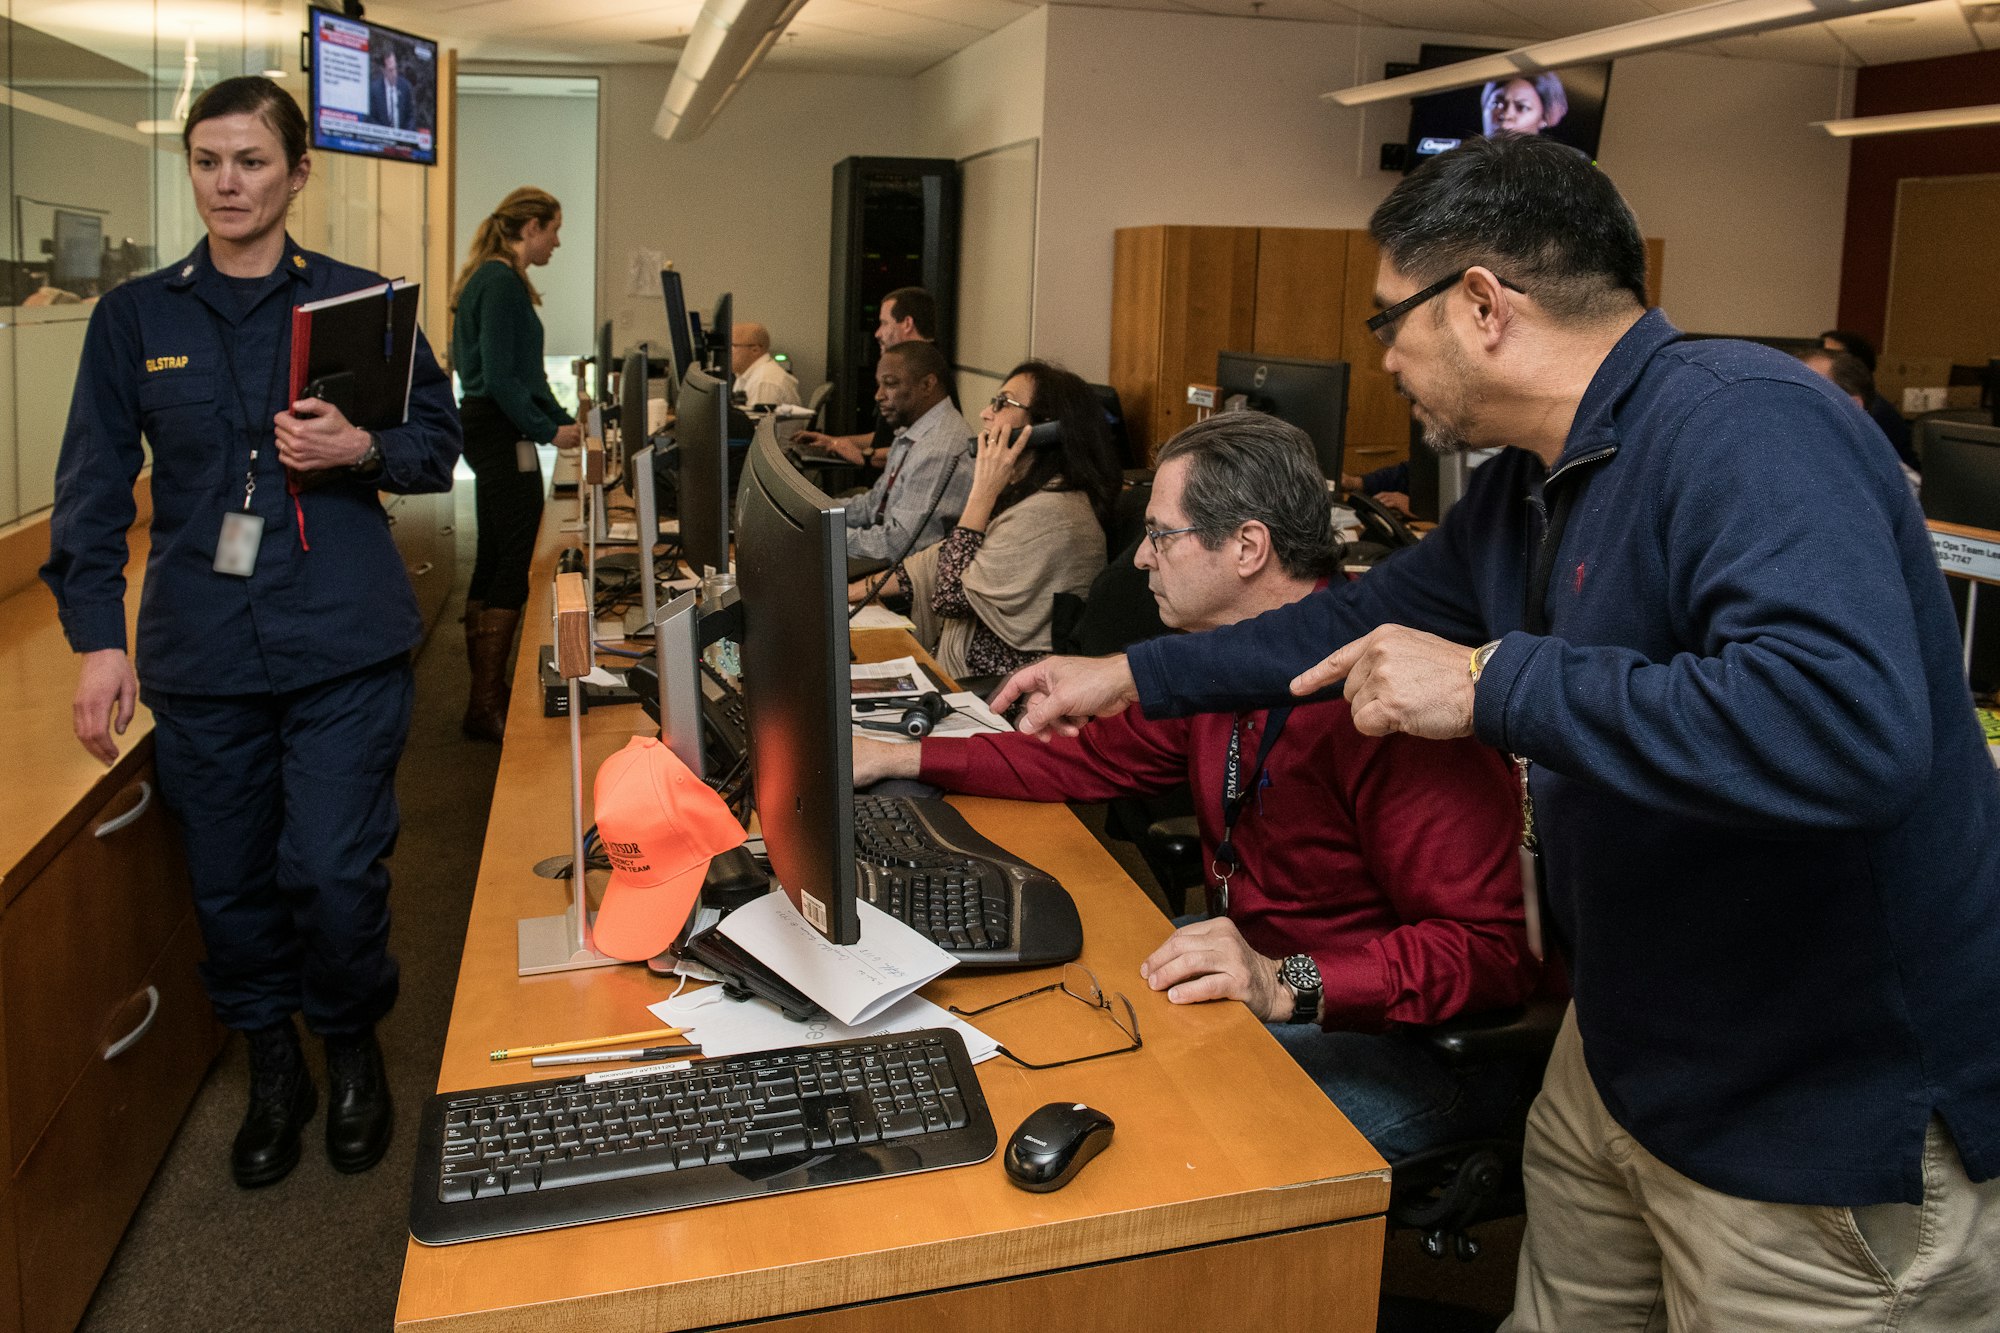 Outbreak response in action: Centers for Disease Control and Prevention (CDC) staff support the 2019 nCoV response in the CDC’s Emergency Operations Center (EOC).